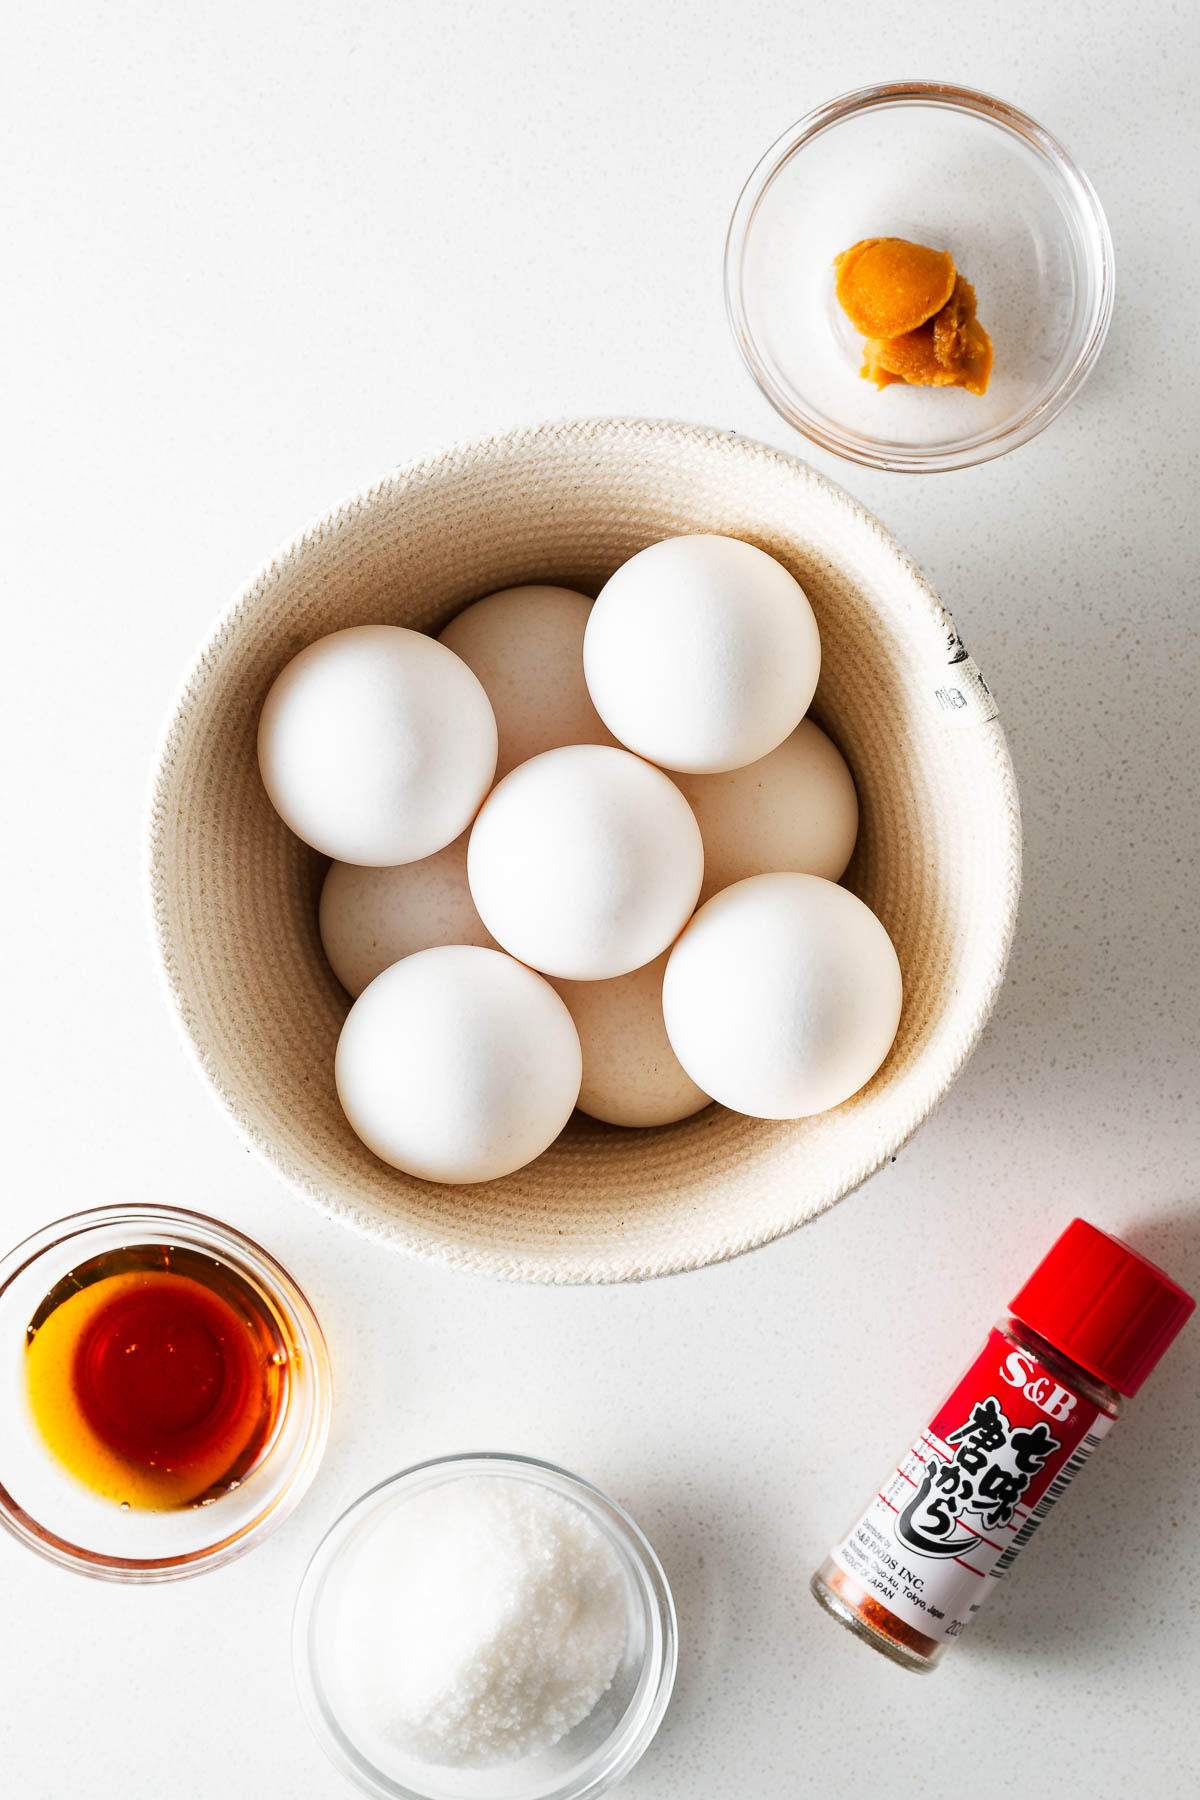 Ingredients for miso eggs arranged on a kitchen counter viewed from above.